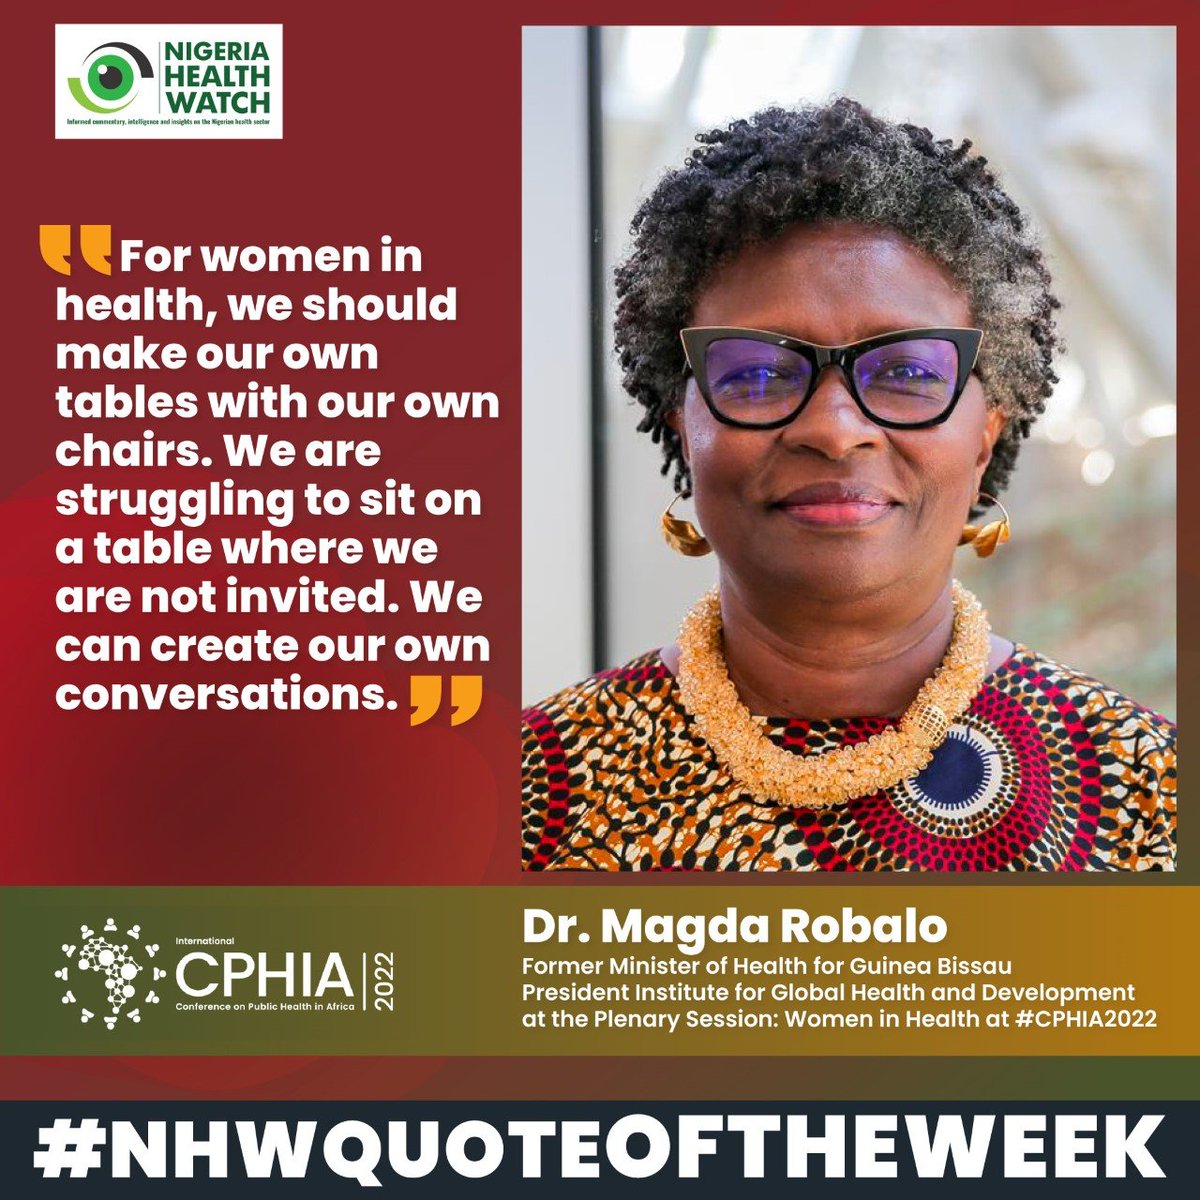 #NHWQUOTEOFTHEWEEK

Mountains of work, silent voices. Women account for 70% of jobs in the health workforce,but hold fewer leadership positions.

We must change this status quo & ensure equitable leadership in global health if we're to attain the #SDGs
@MagdaNRobalo @DrEmeruemJnr